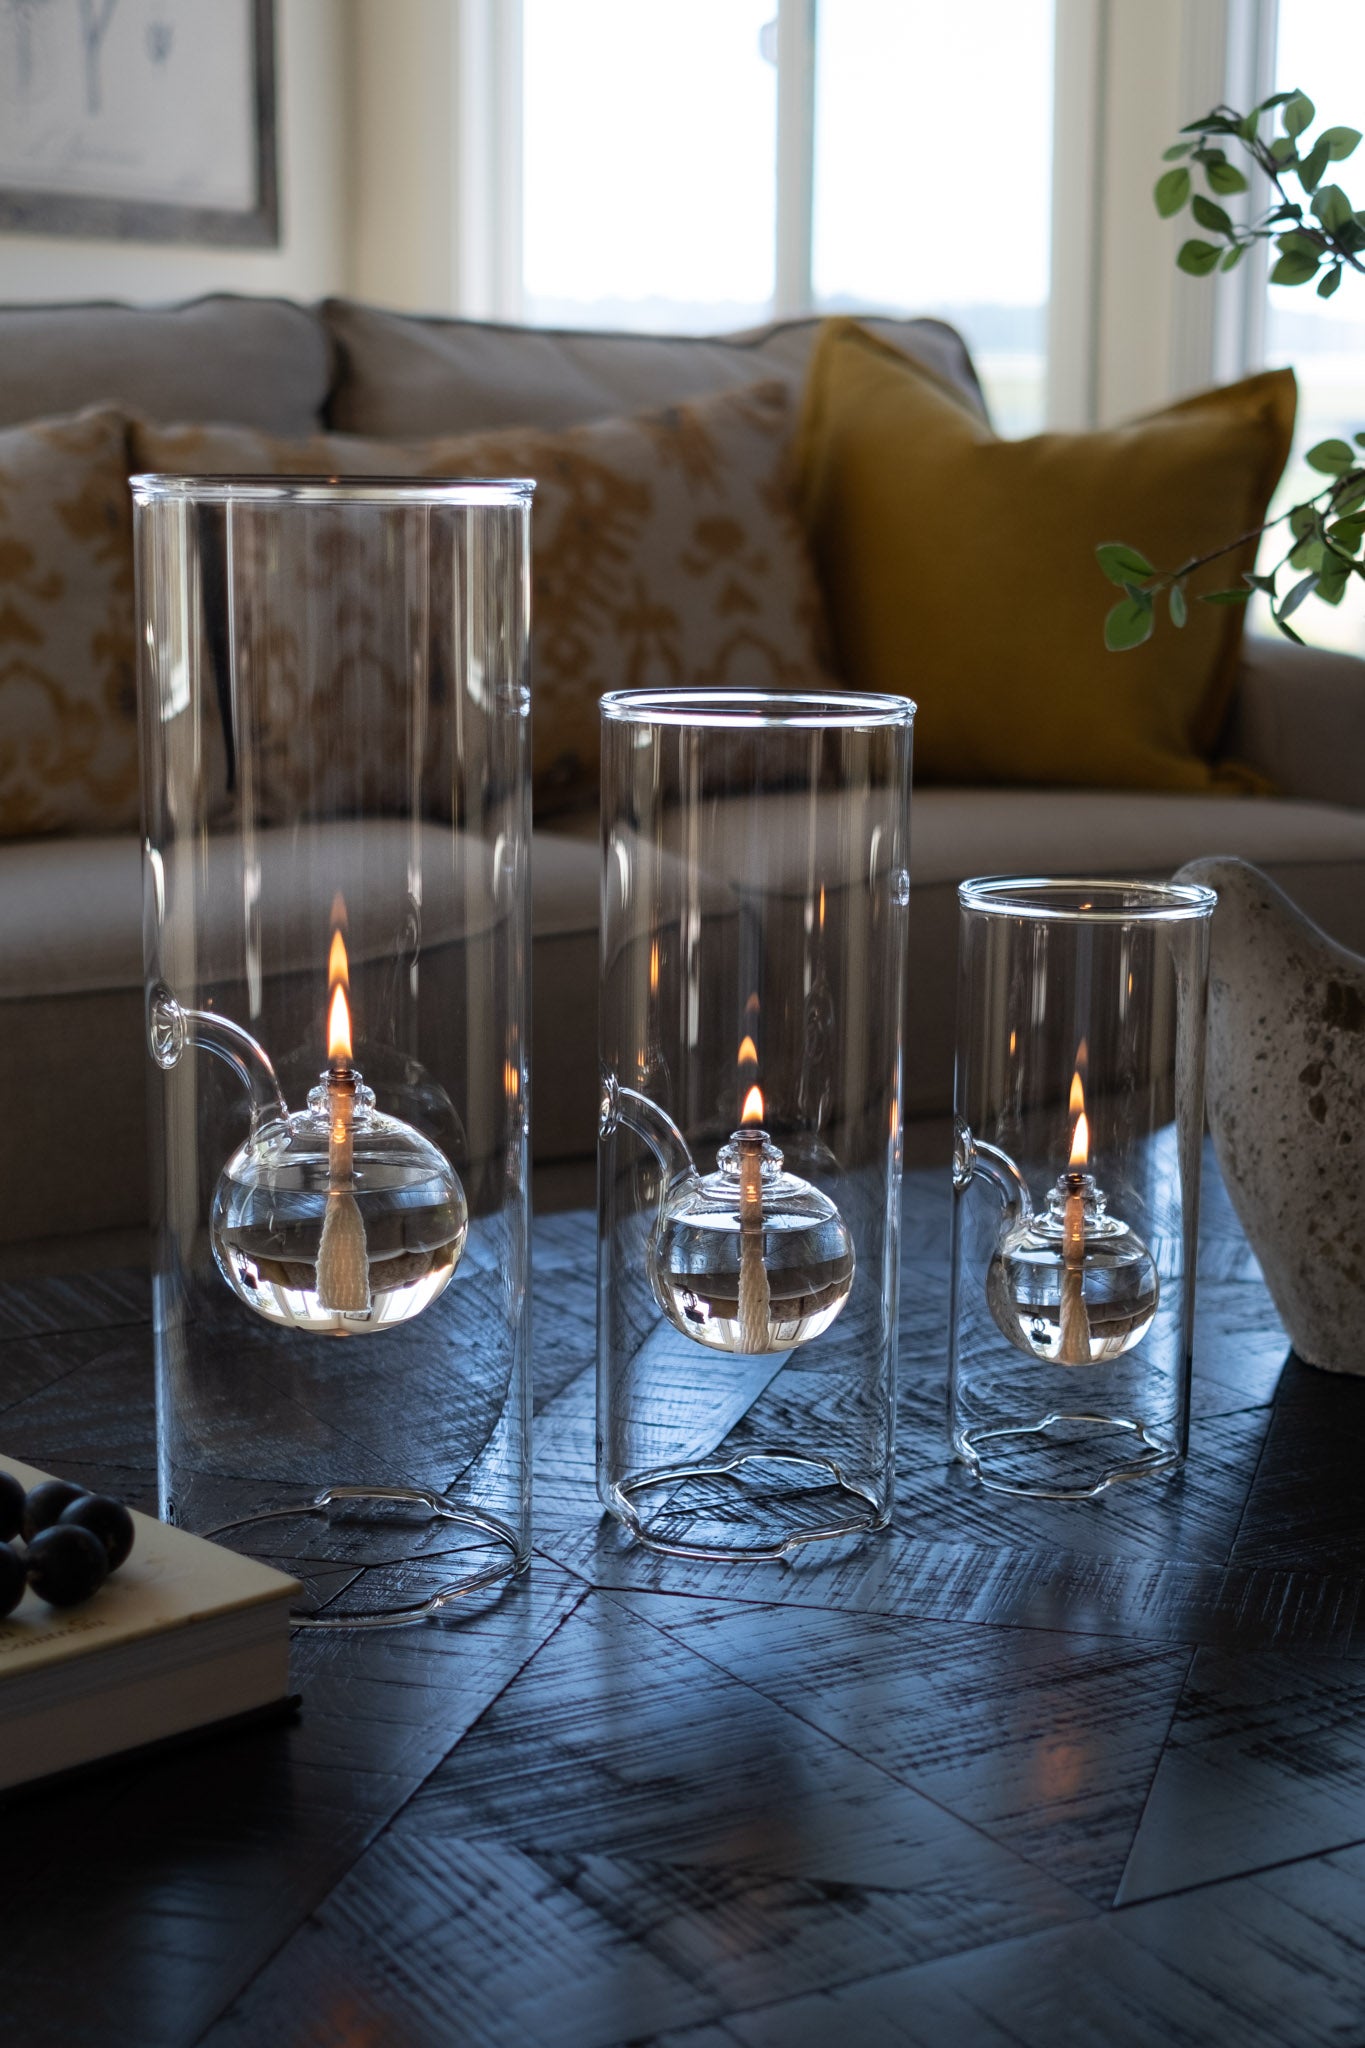 Hurricane Lamps for sale in Portland, Maine